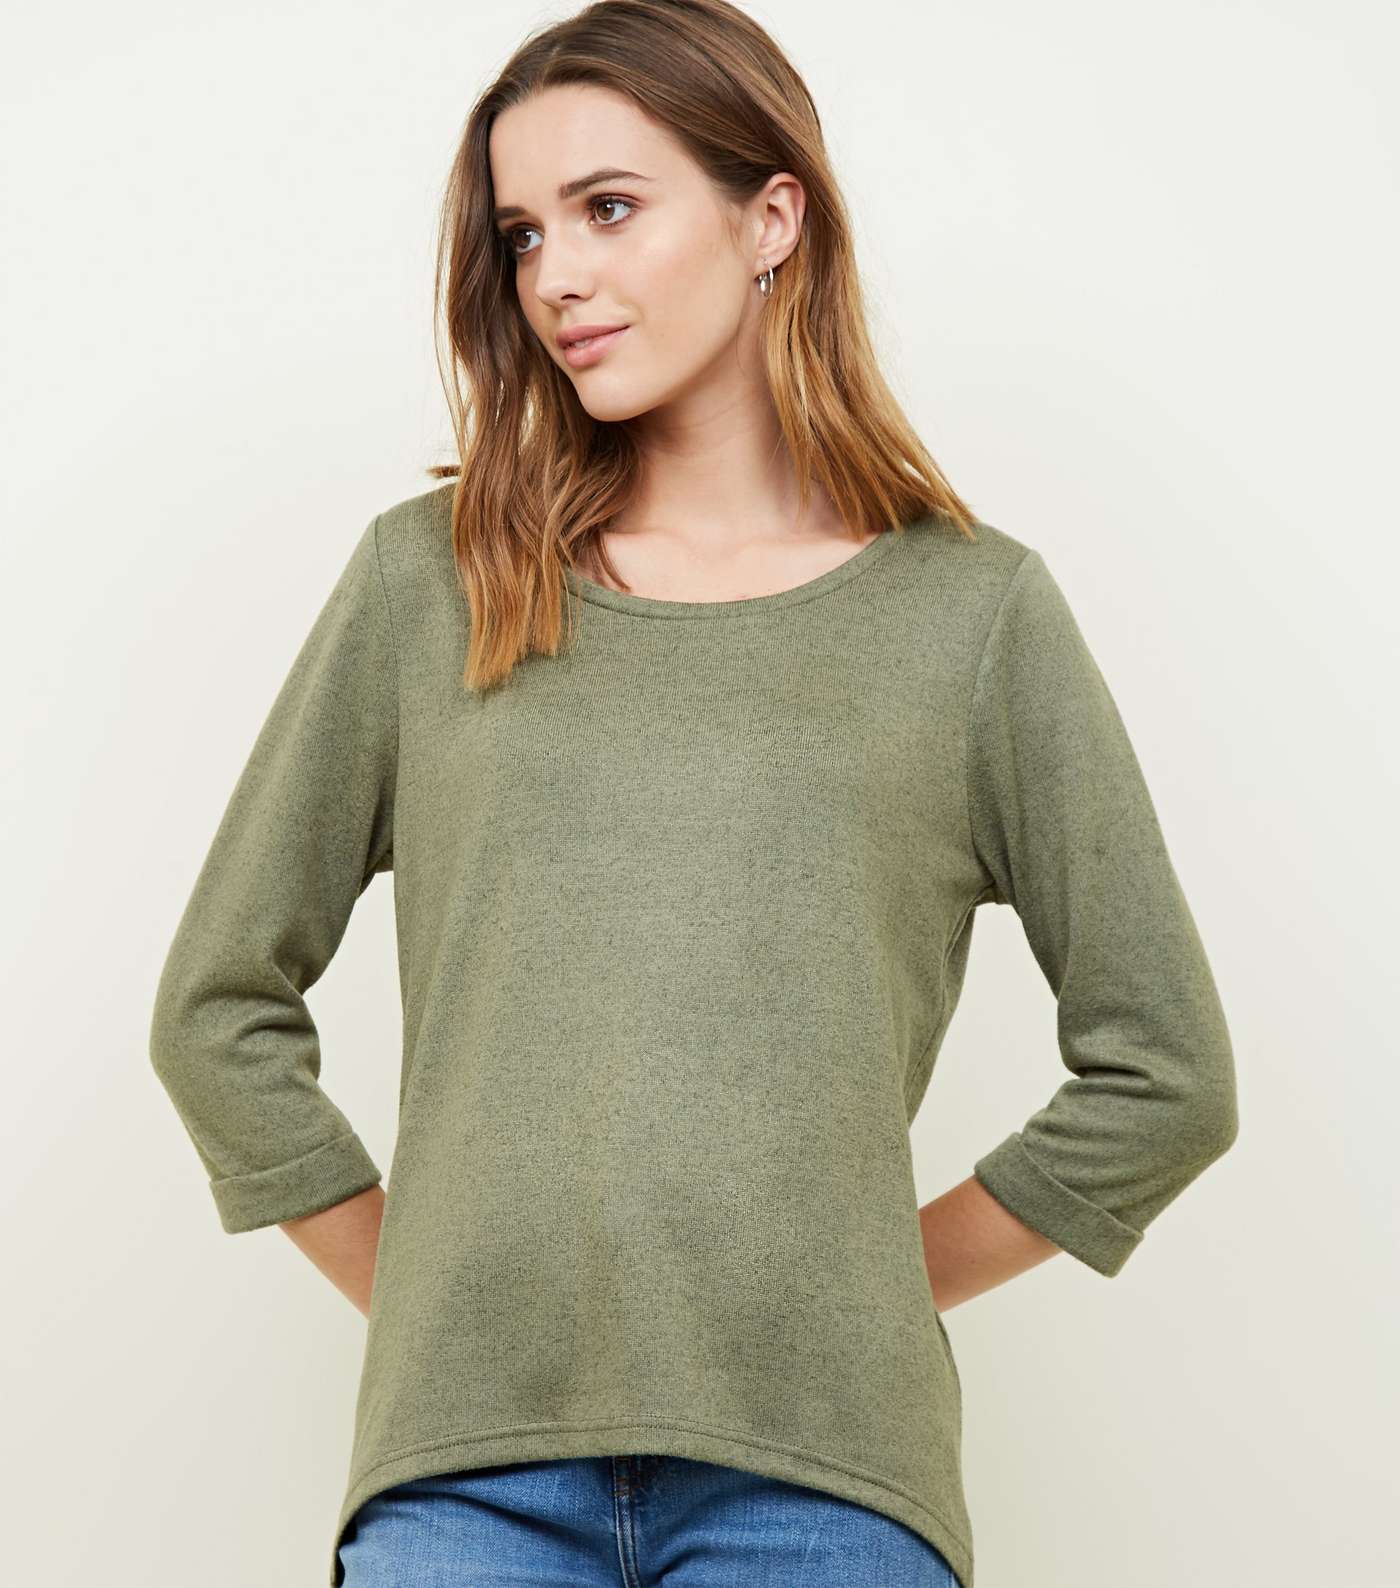 Olive Green 3/4 Sleeve Fine Knit Top